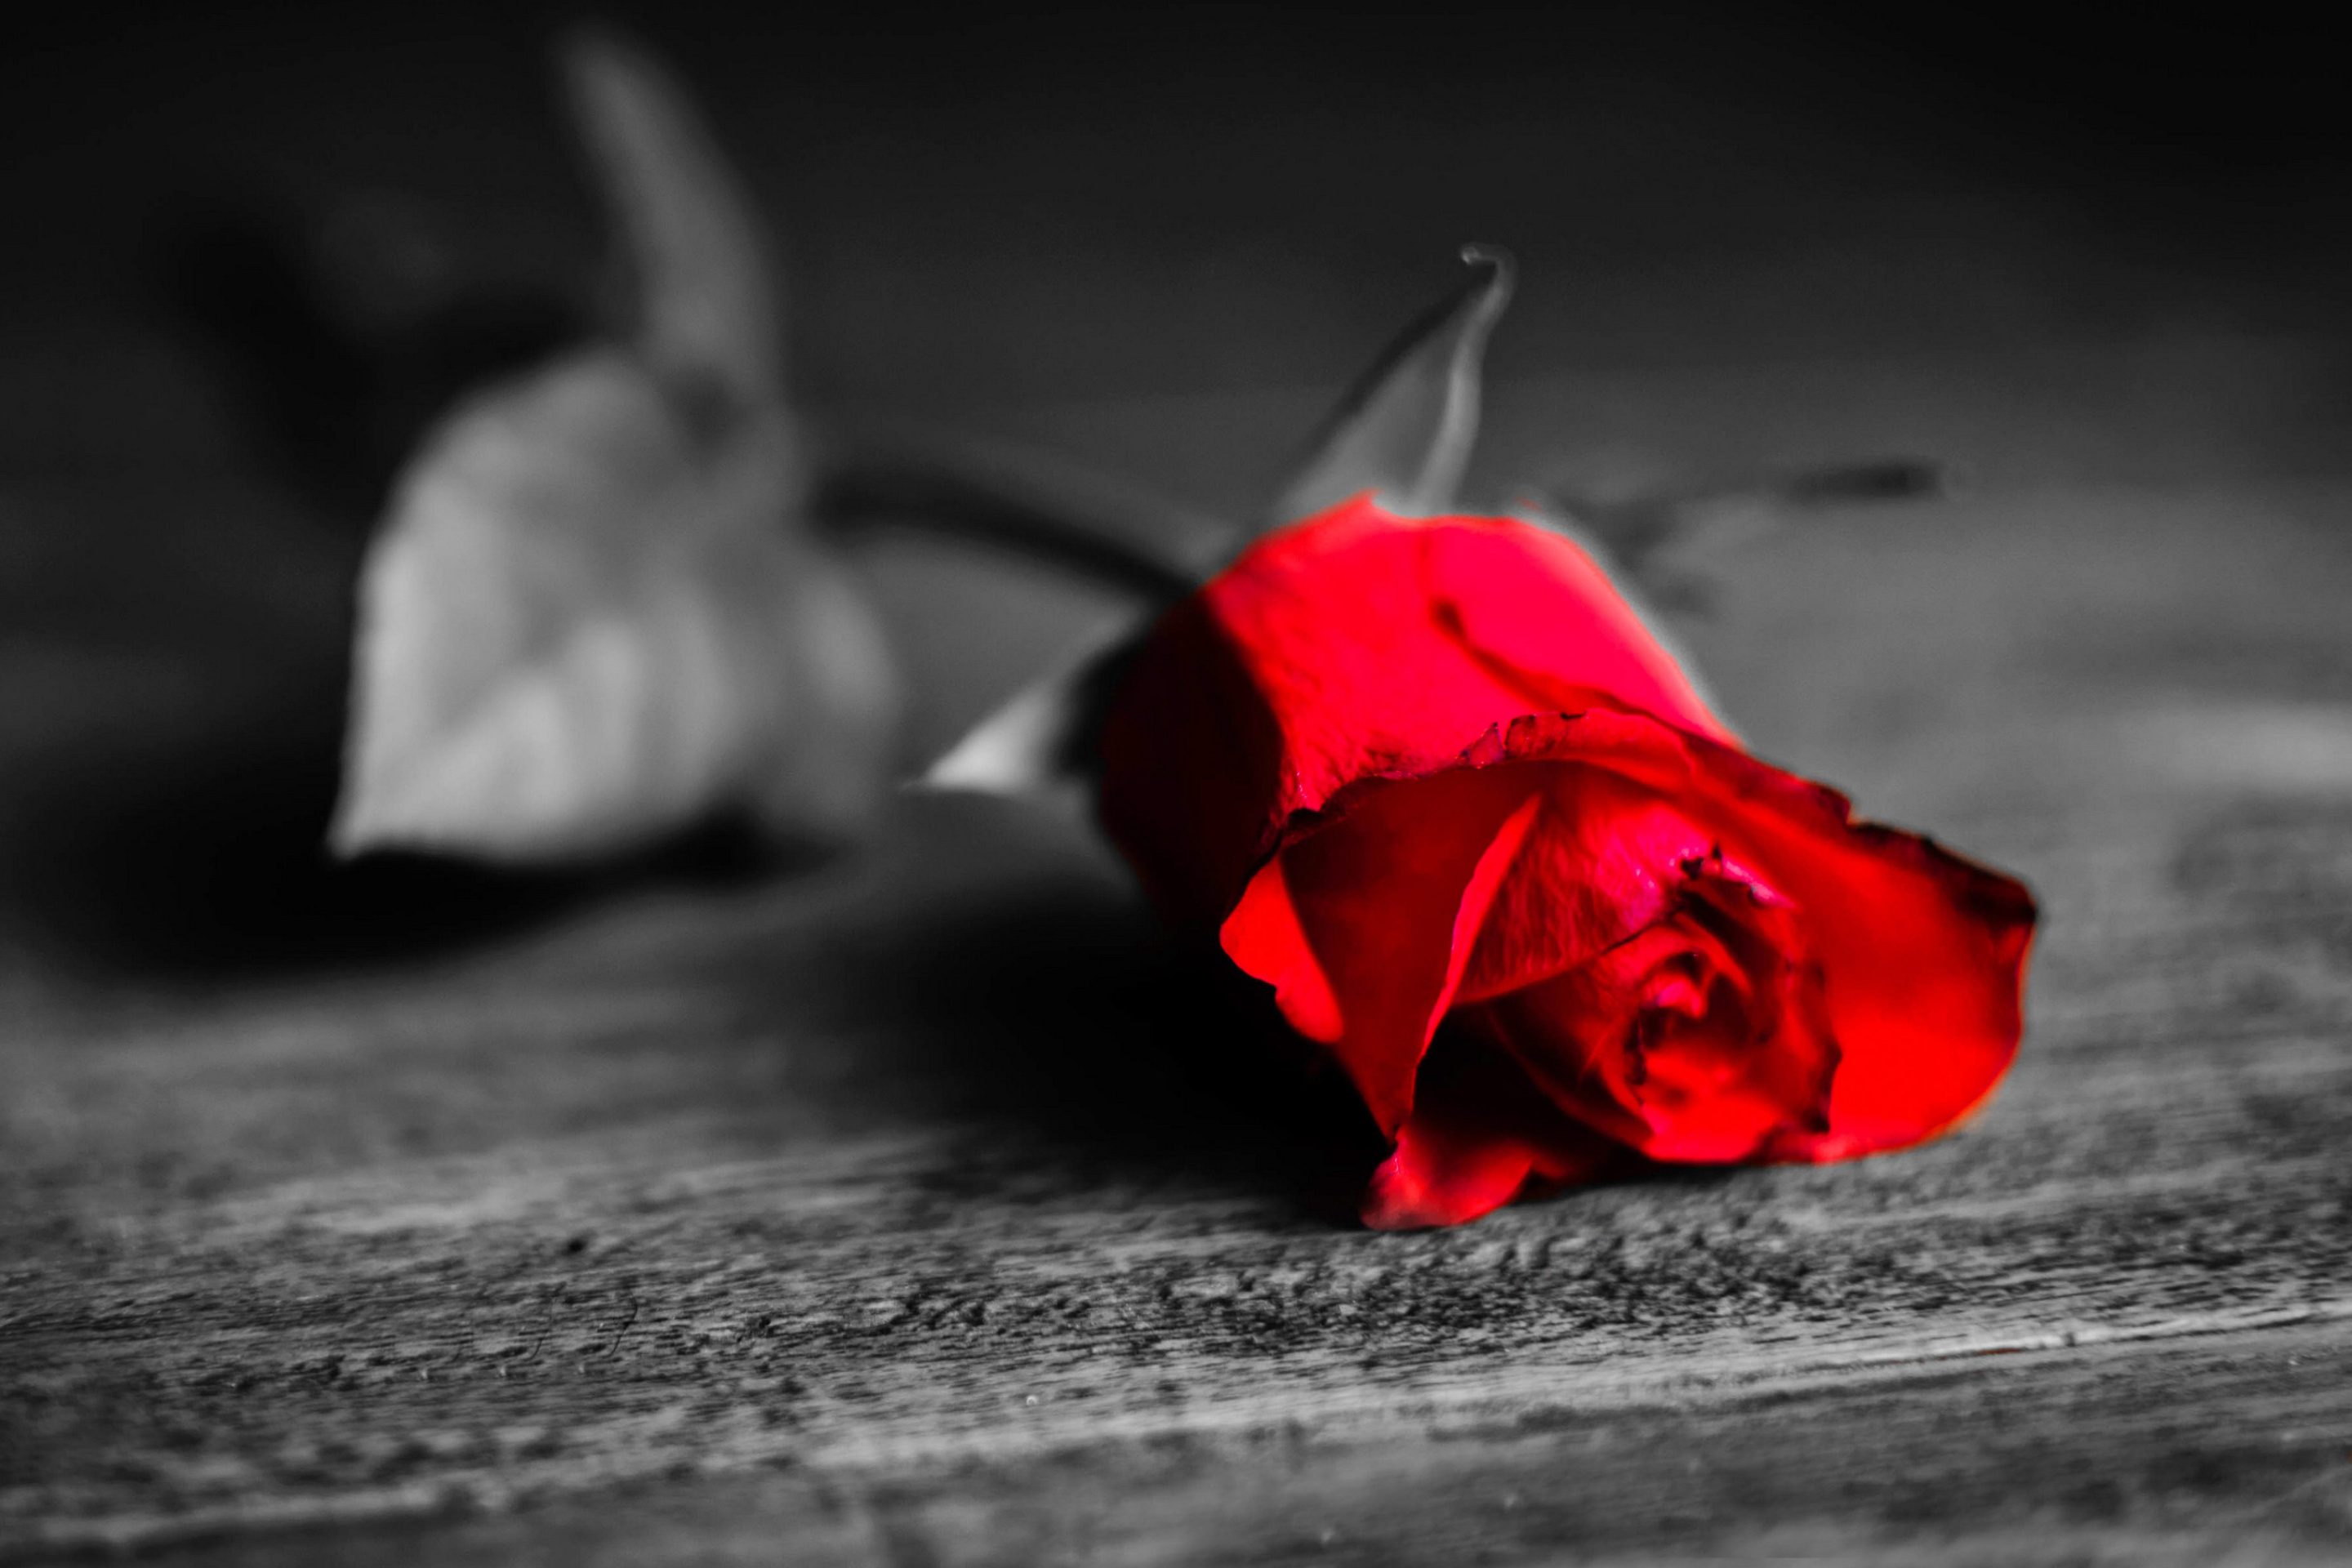 Red Rose On Wooden Surface wallpaper 2880x1920